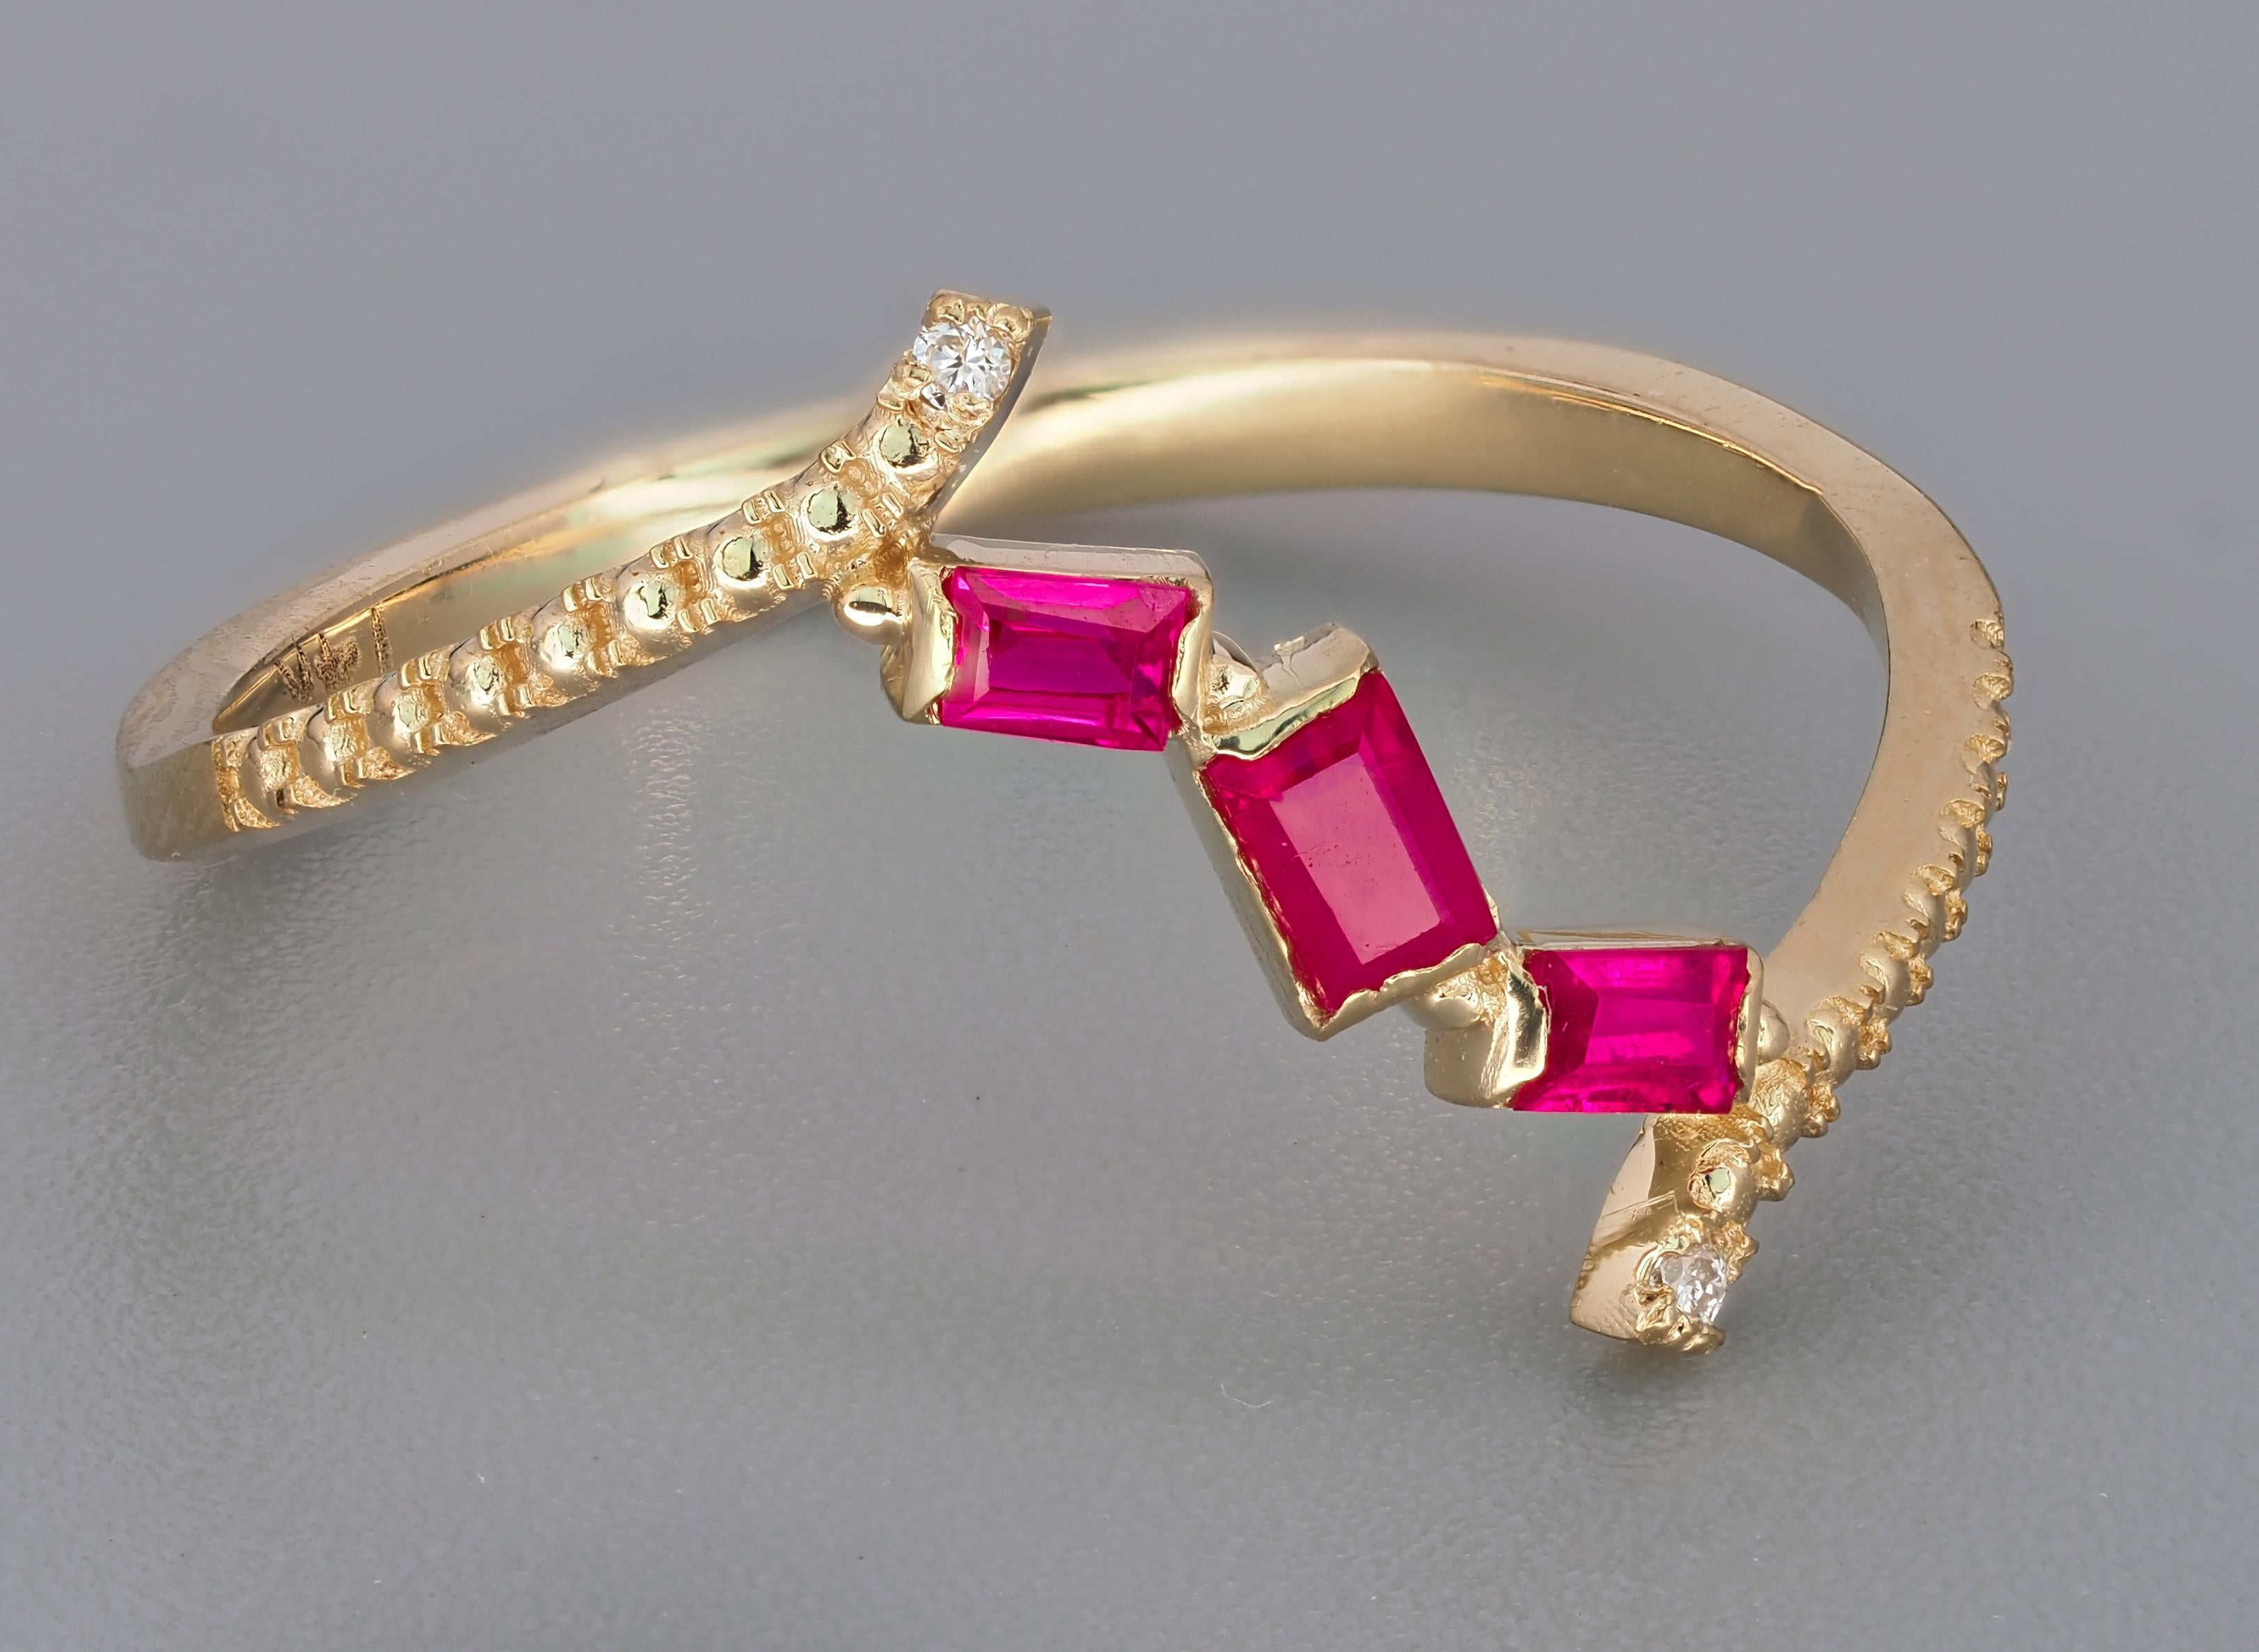 14 kt solid gold ring with natural rubies and diamonds. July birthstone.
Weight: 1.3 g. - depends from size

Central stone: Natural rubies - 3 pieces
Cut: Baguette
Weight: approx 0.60 ct.
Color: Red
Clarity: Transparent with inclusions (See in